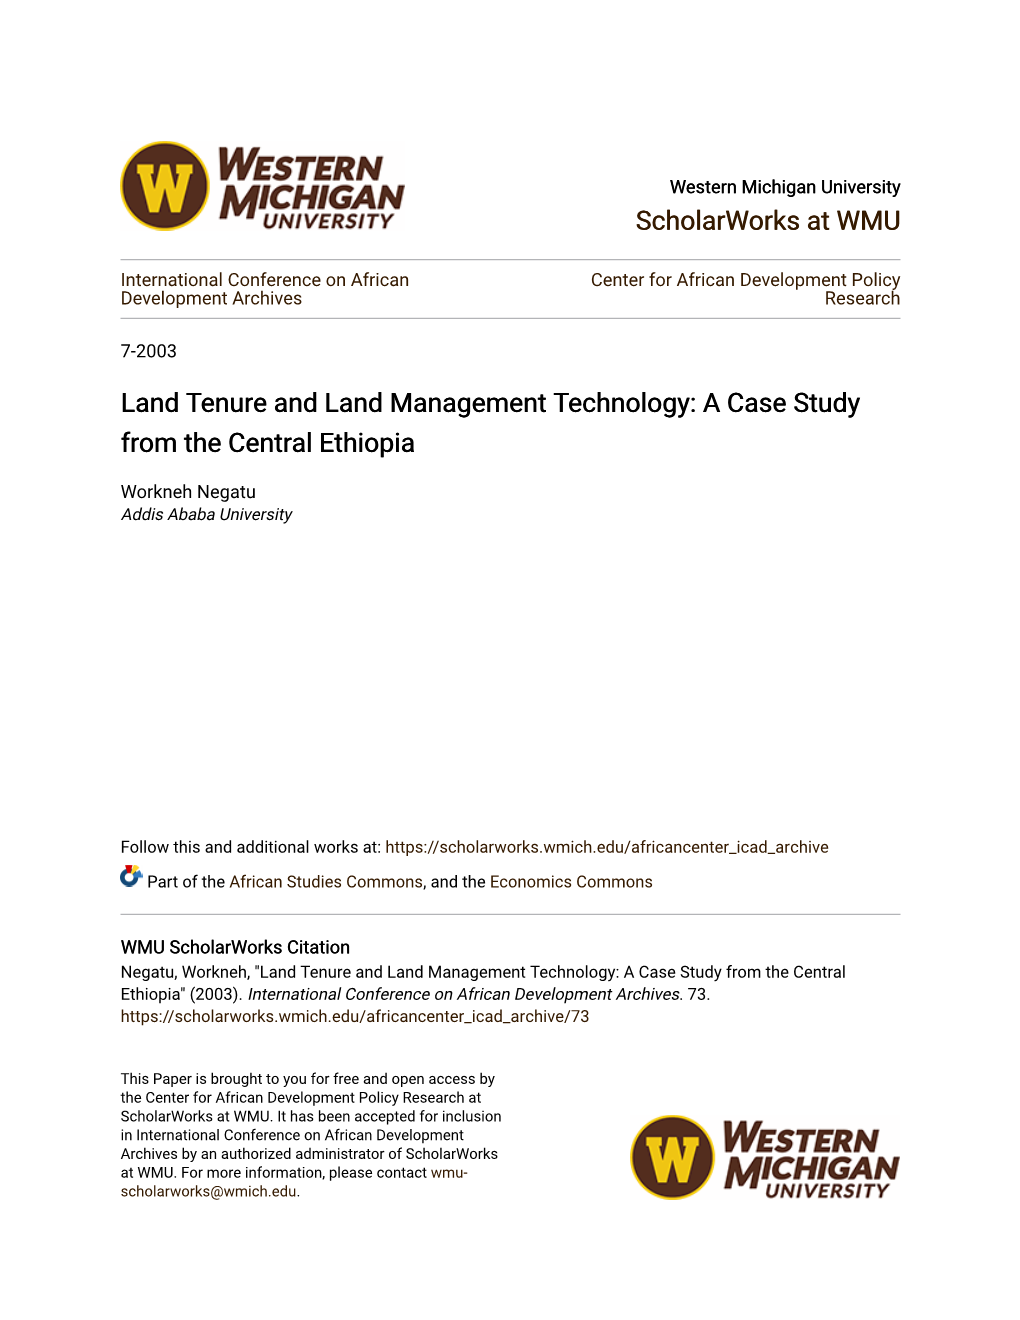 Land Tenure and Land Management Technology: a Case Study from the Central Ethiopia